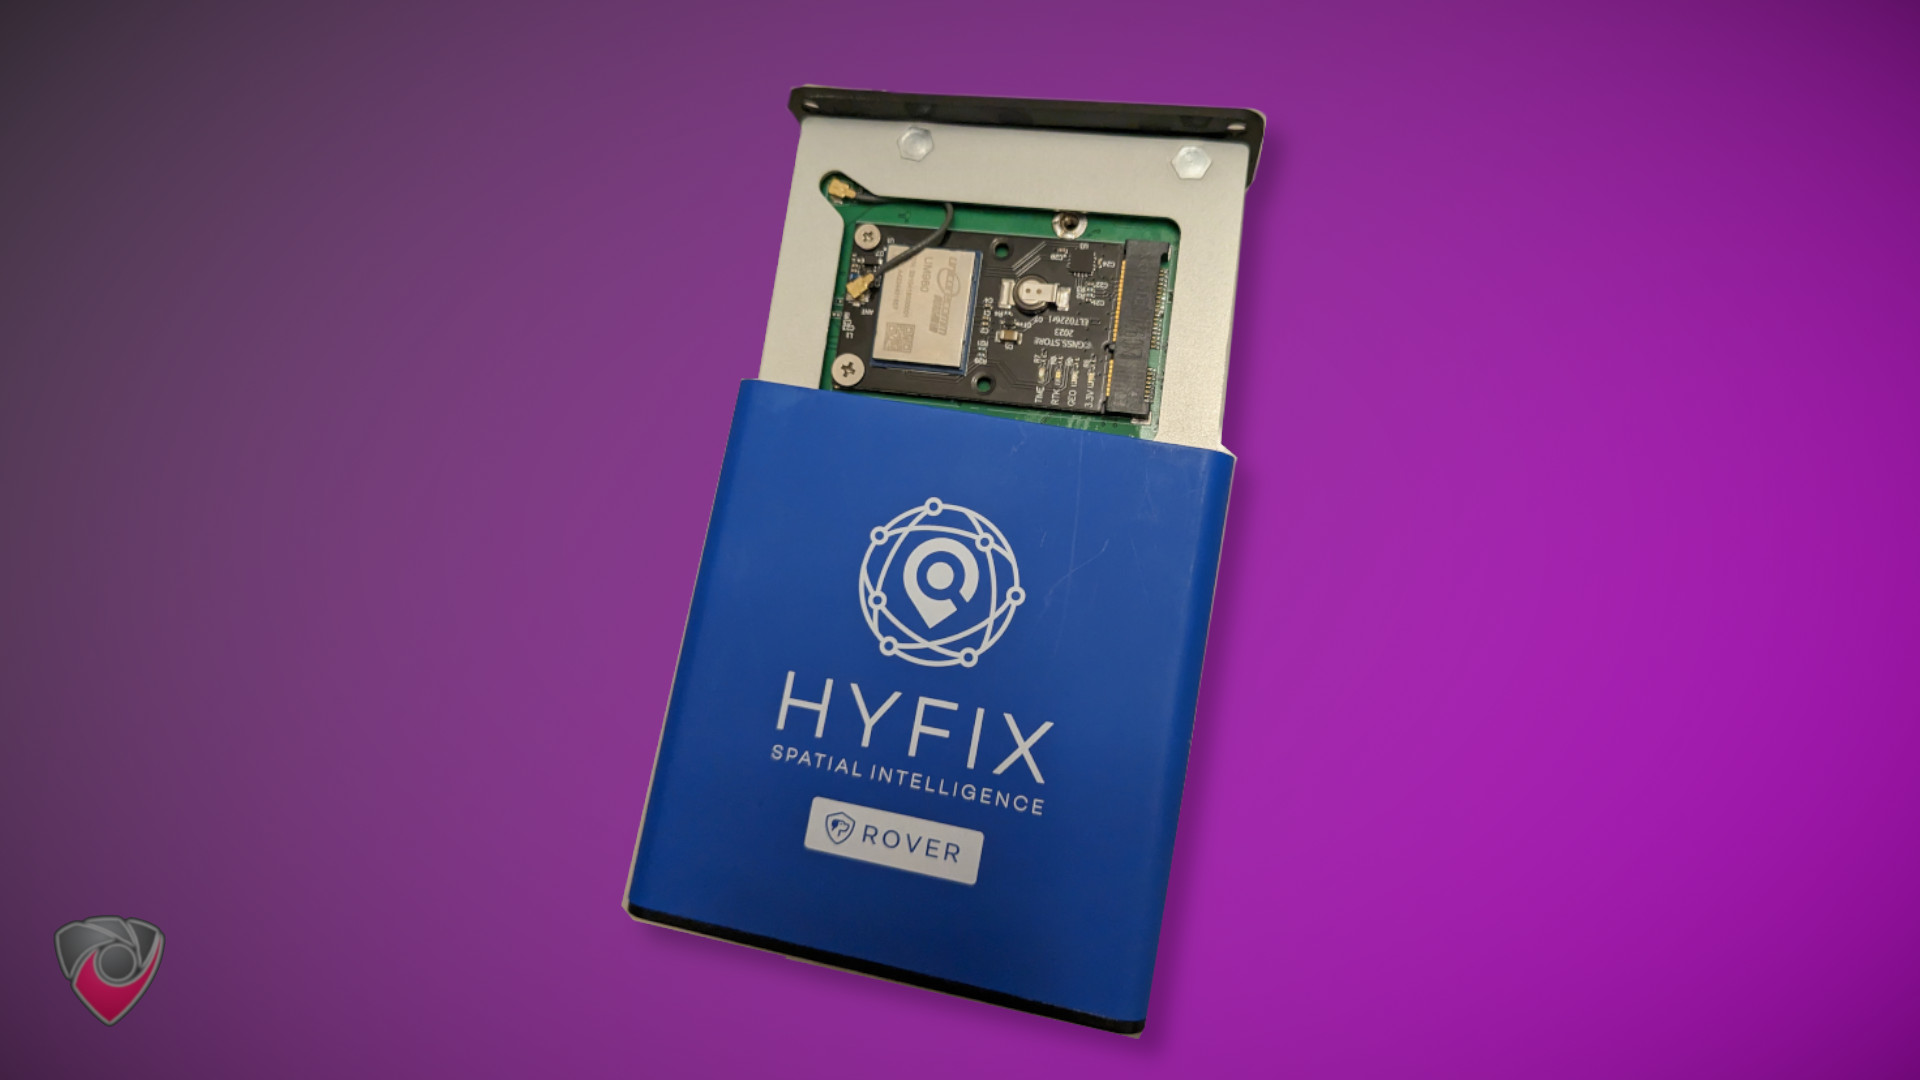 Trying UM980 mPCIe Card in the Hyfix USB C RTK Rover